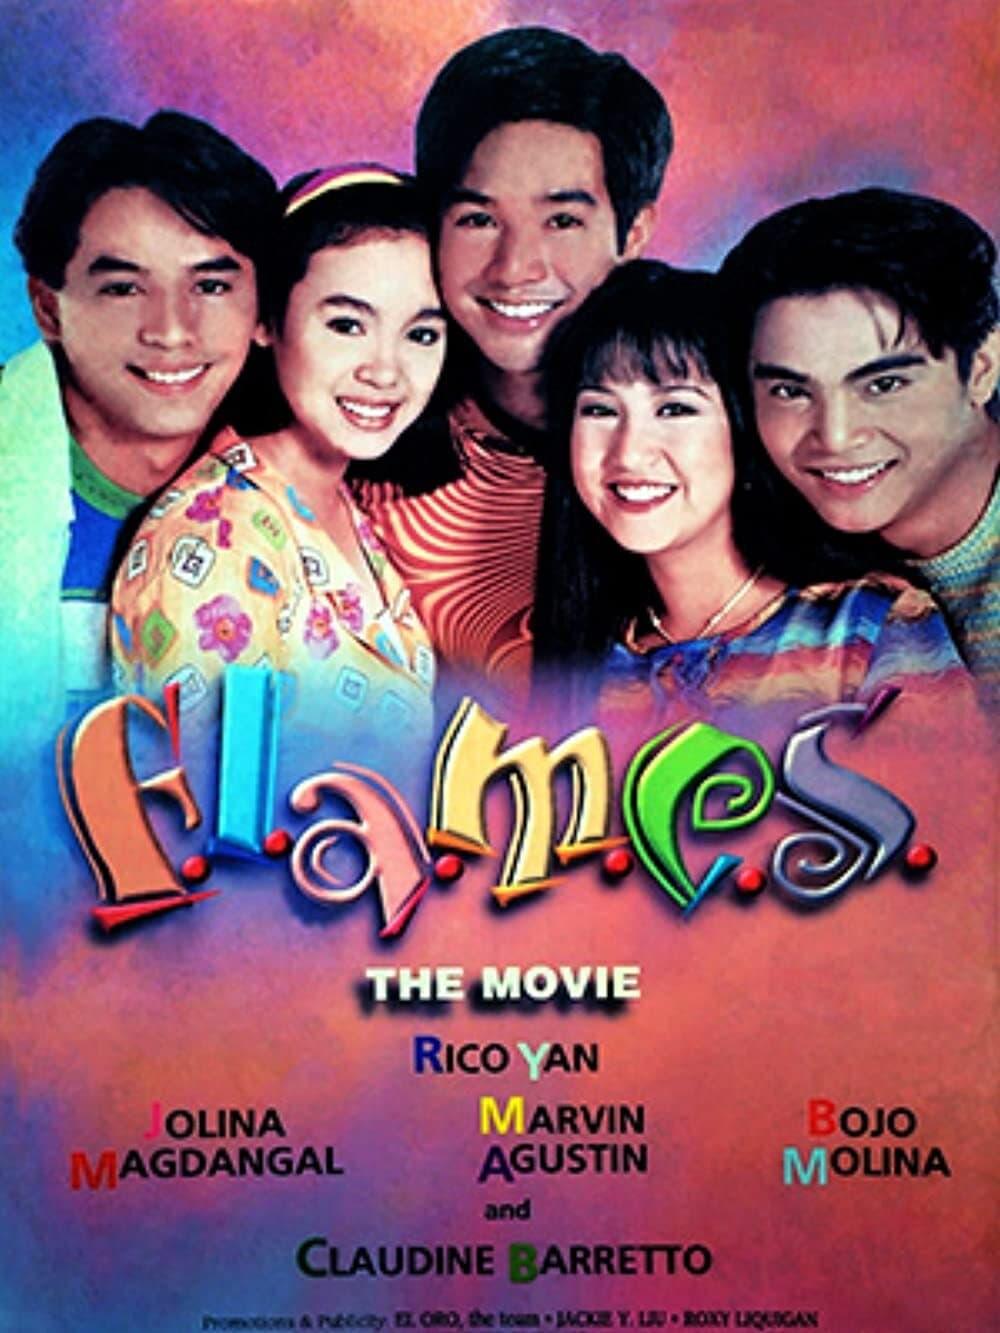 Flames: The Movie poster